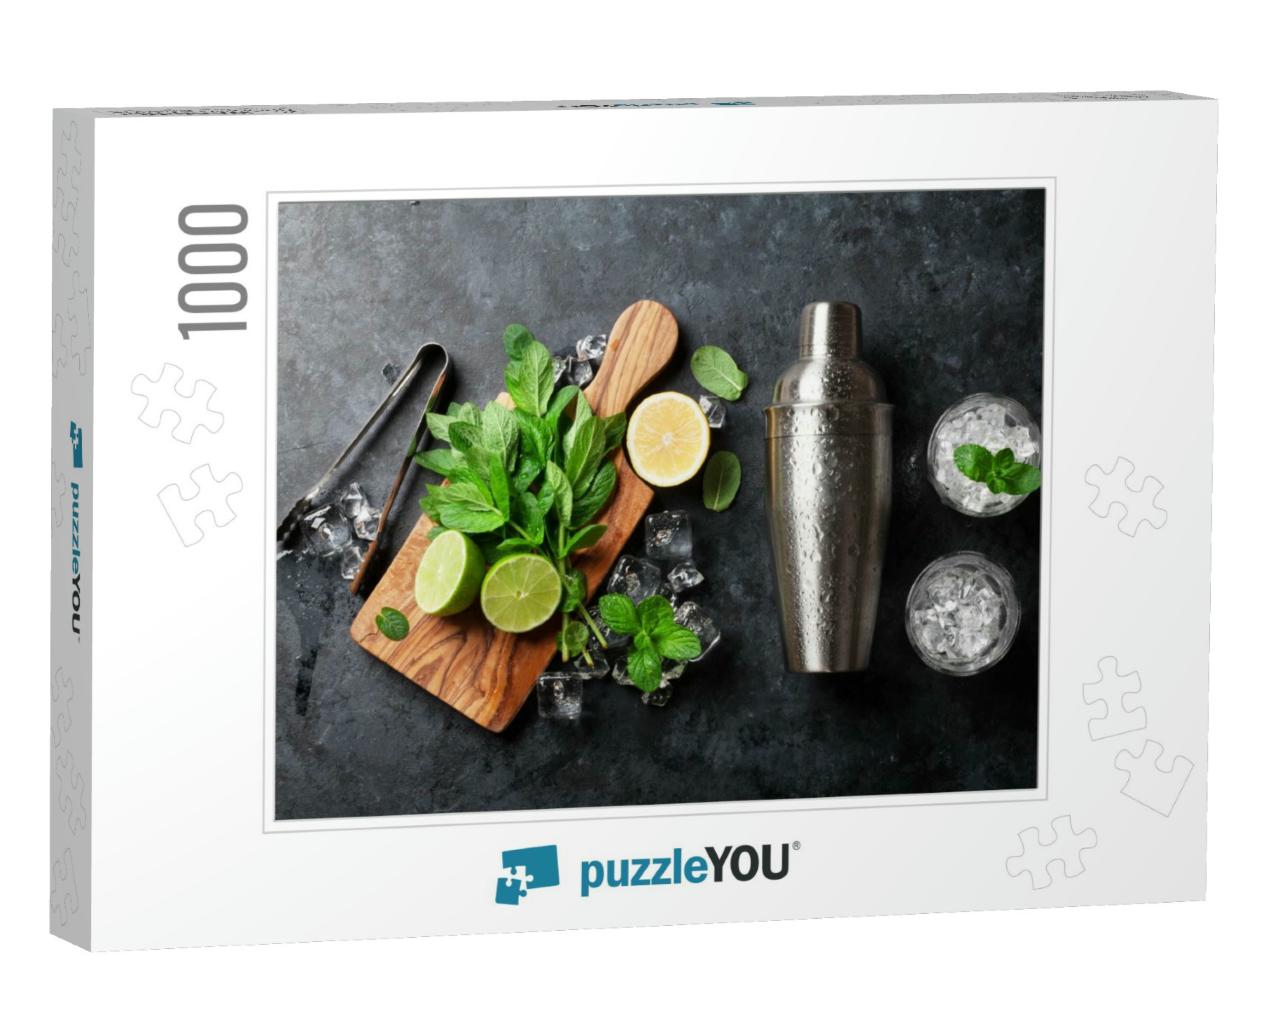 Mojito Cocktail Making. Mint, Lime, Ice Ingredients & Bar... Jigsaw Puzzle with 1000 pieces